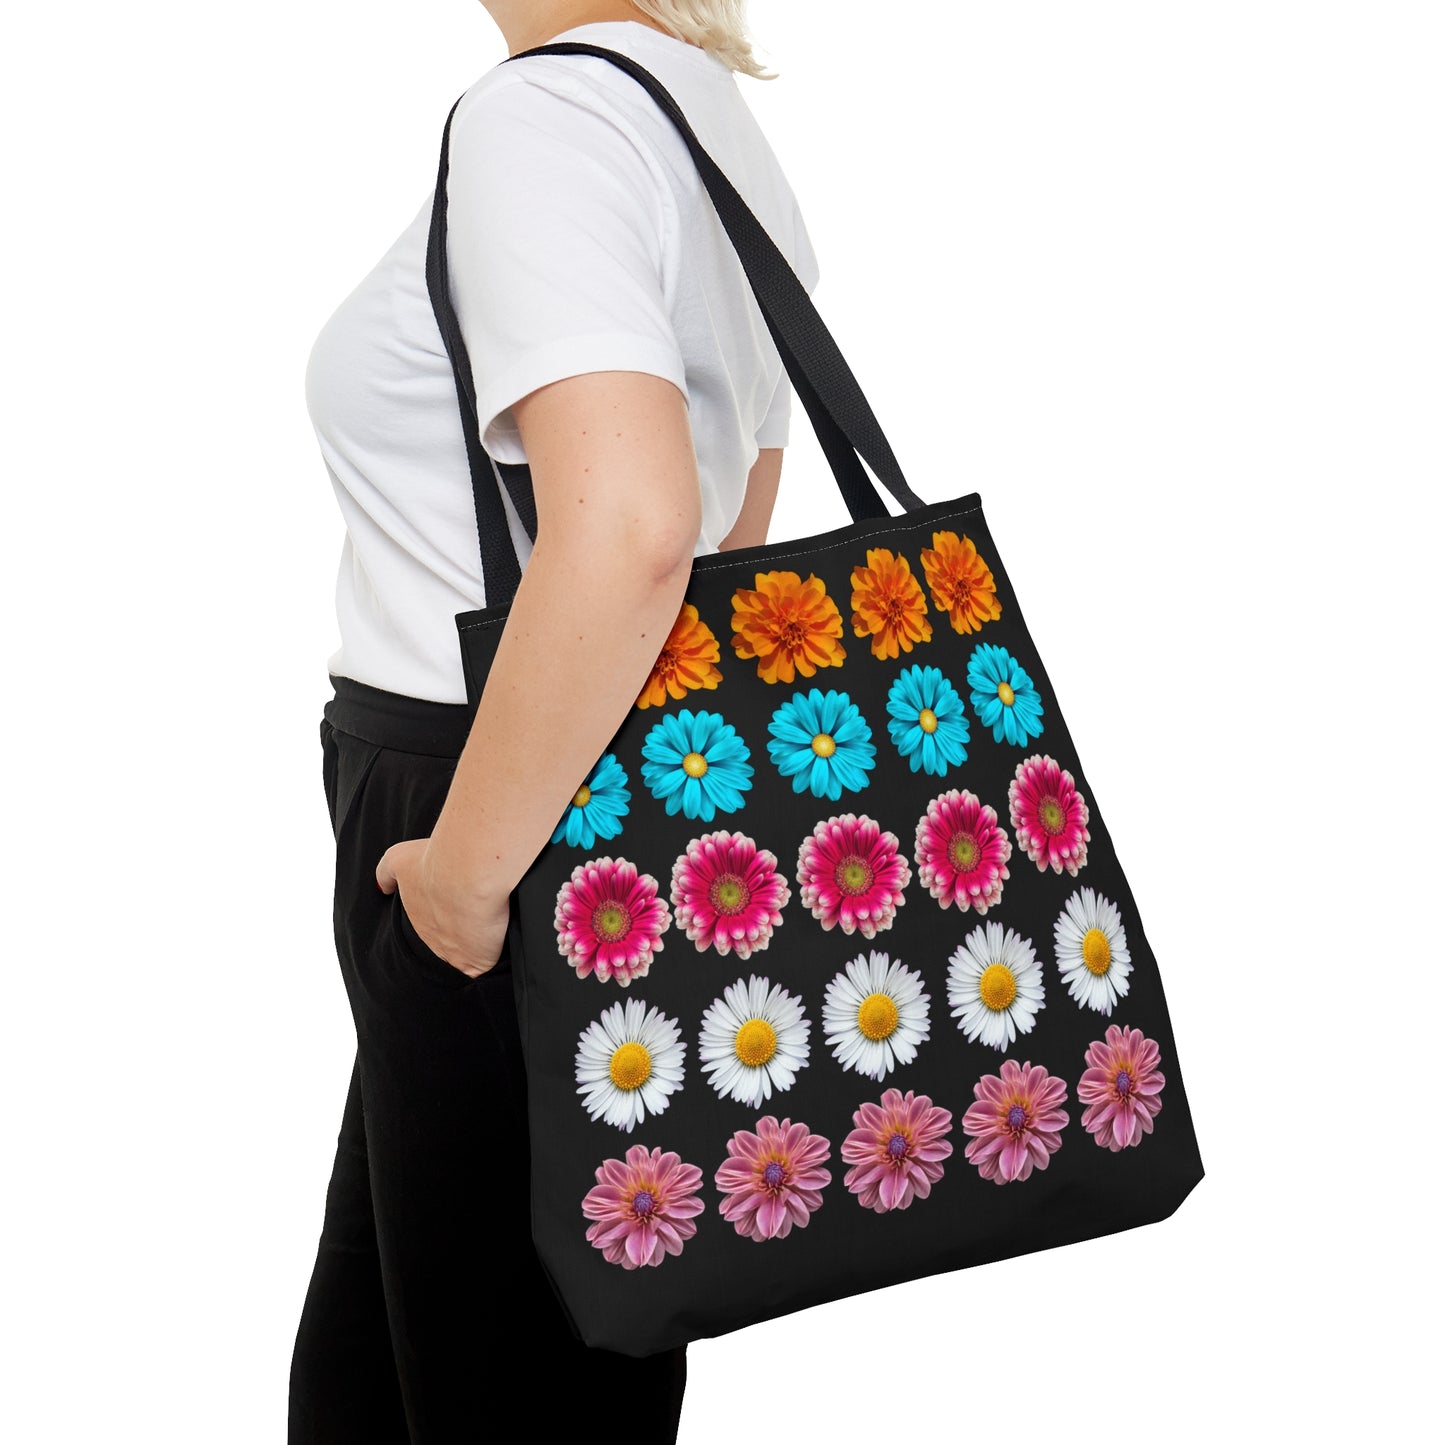 Beautiful flowers on both sides of this tote bag. Come in 3 sizes to meet your needs.